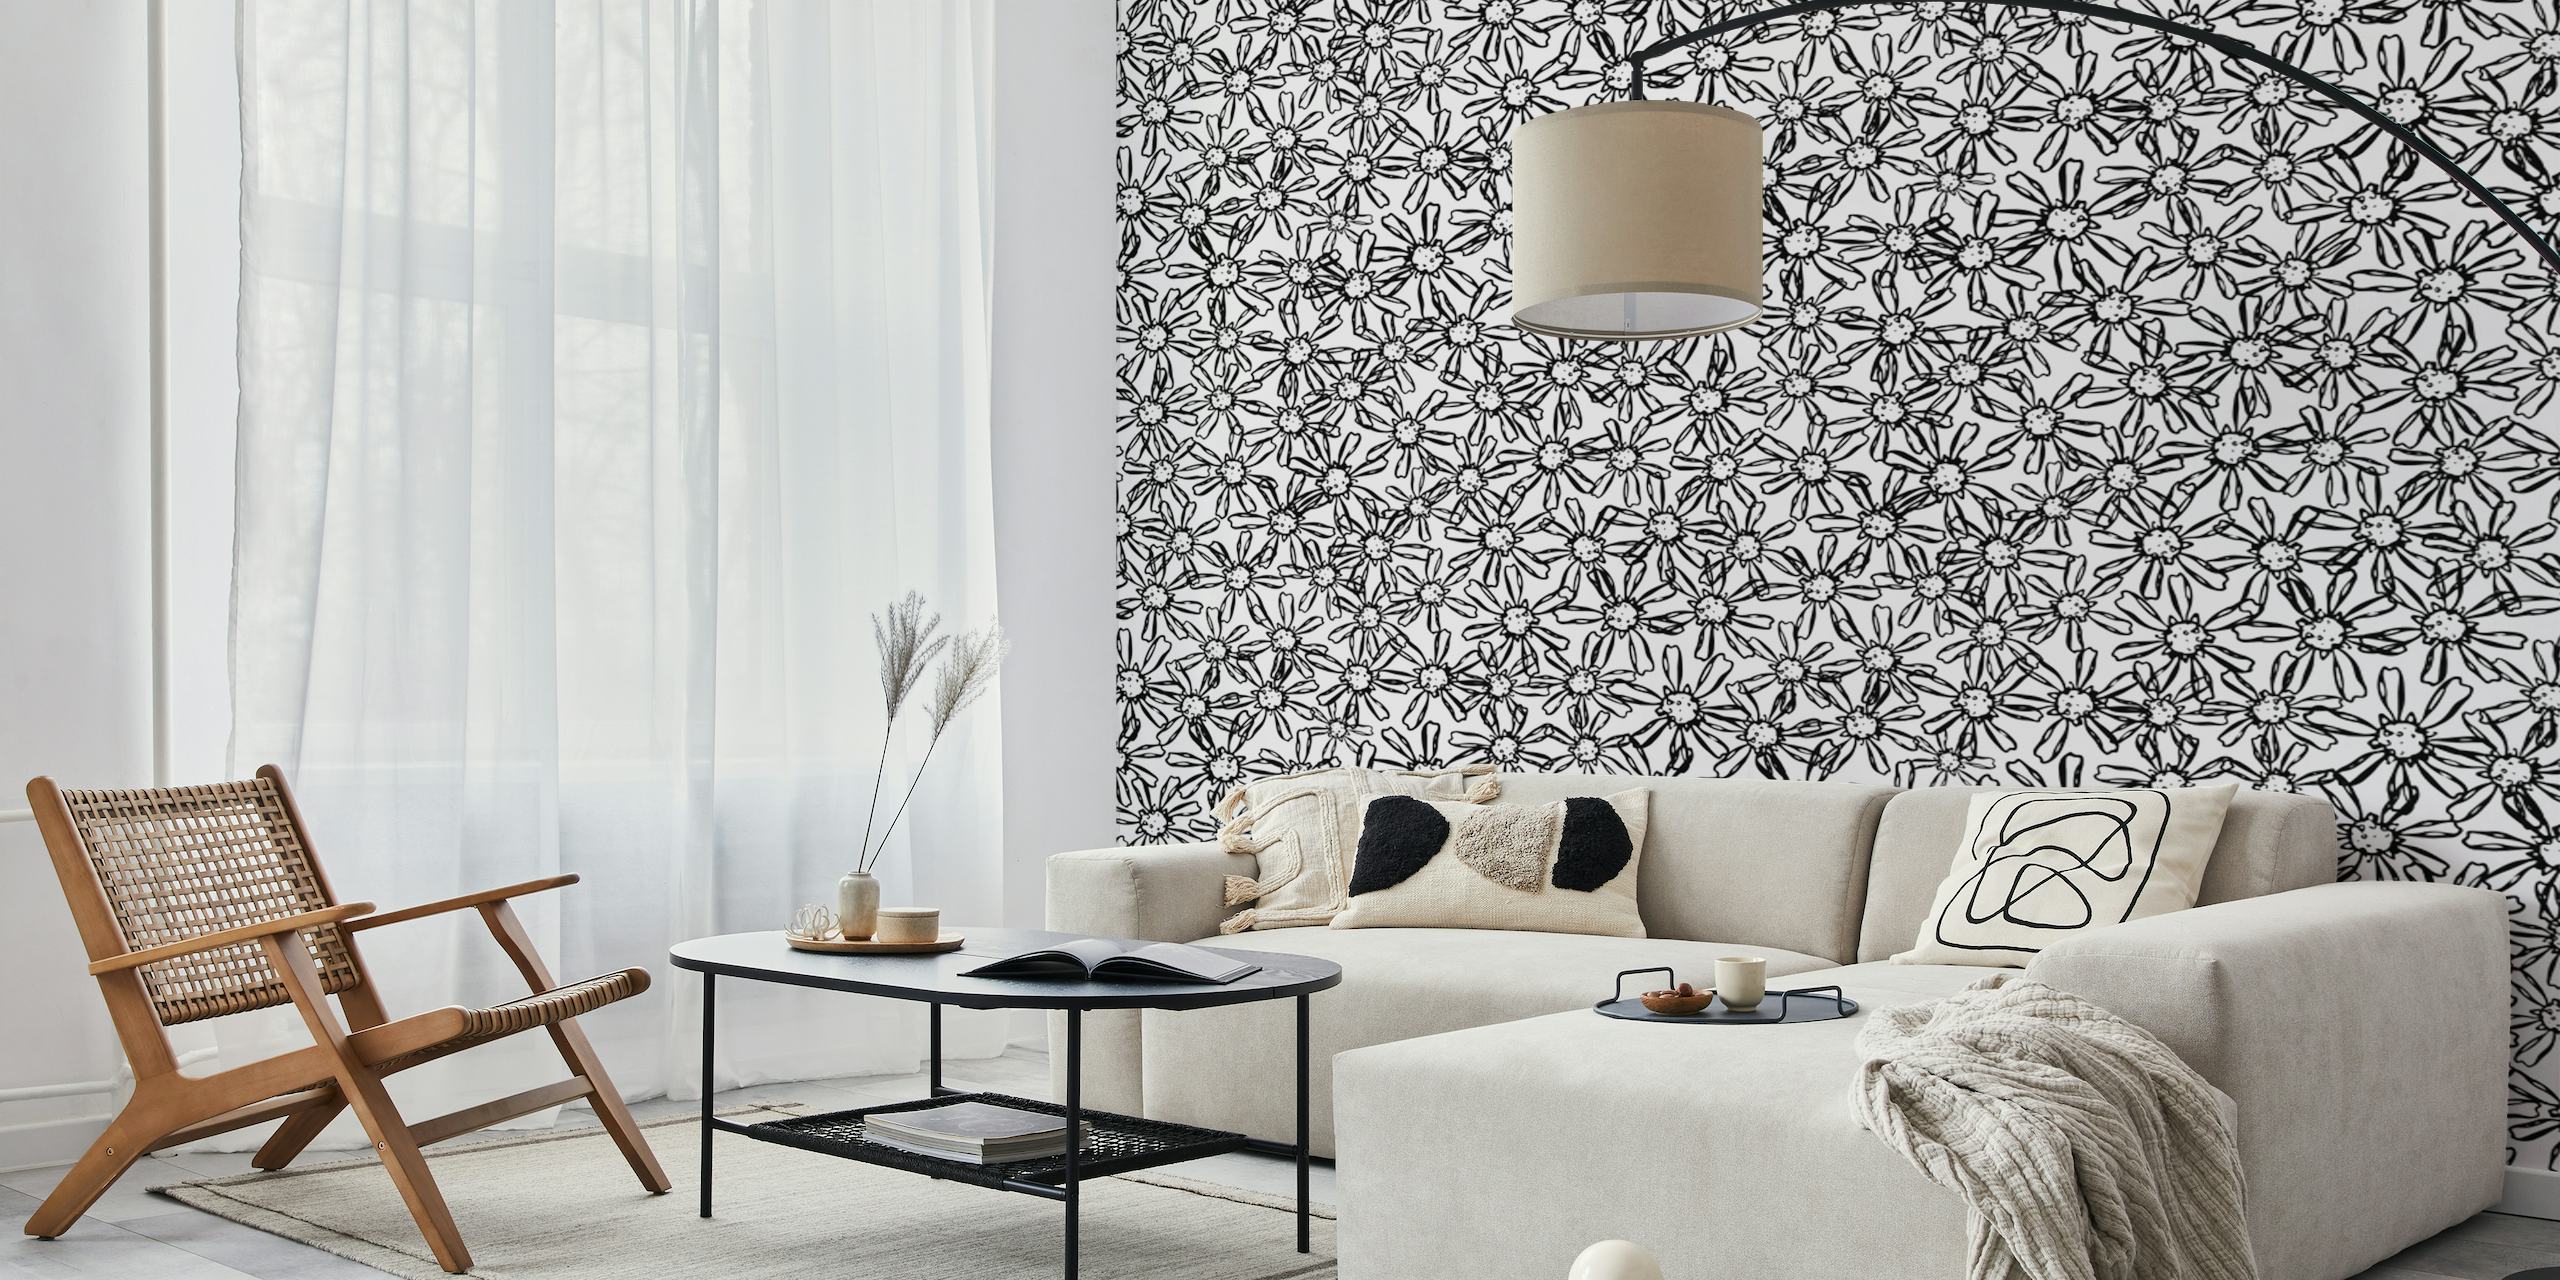 Black and white floral lace pattern wall mural